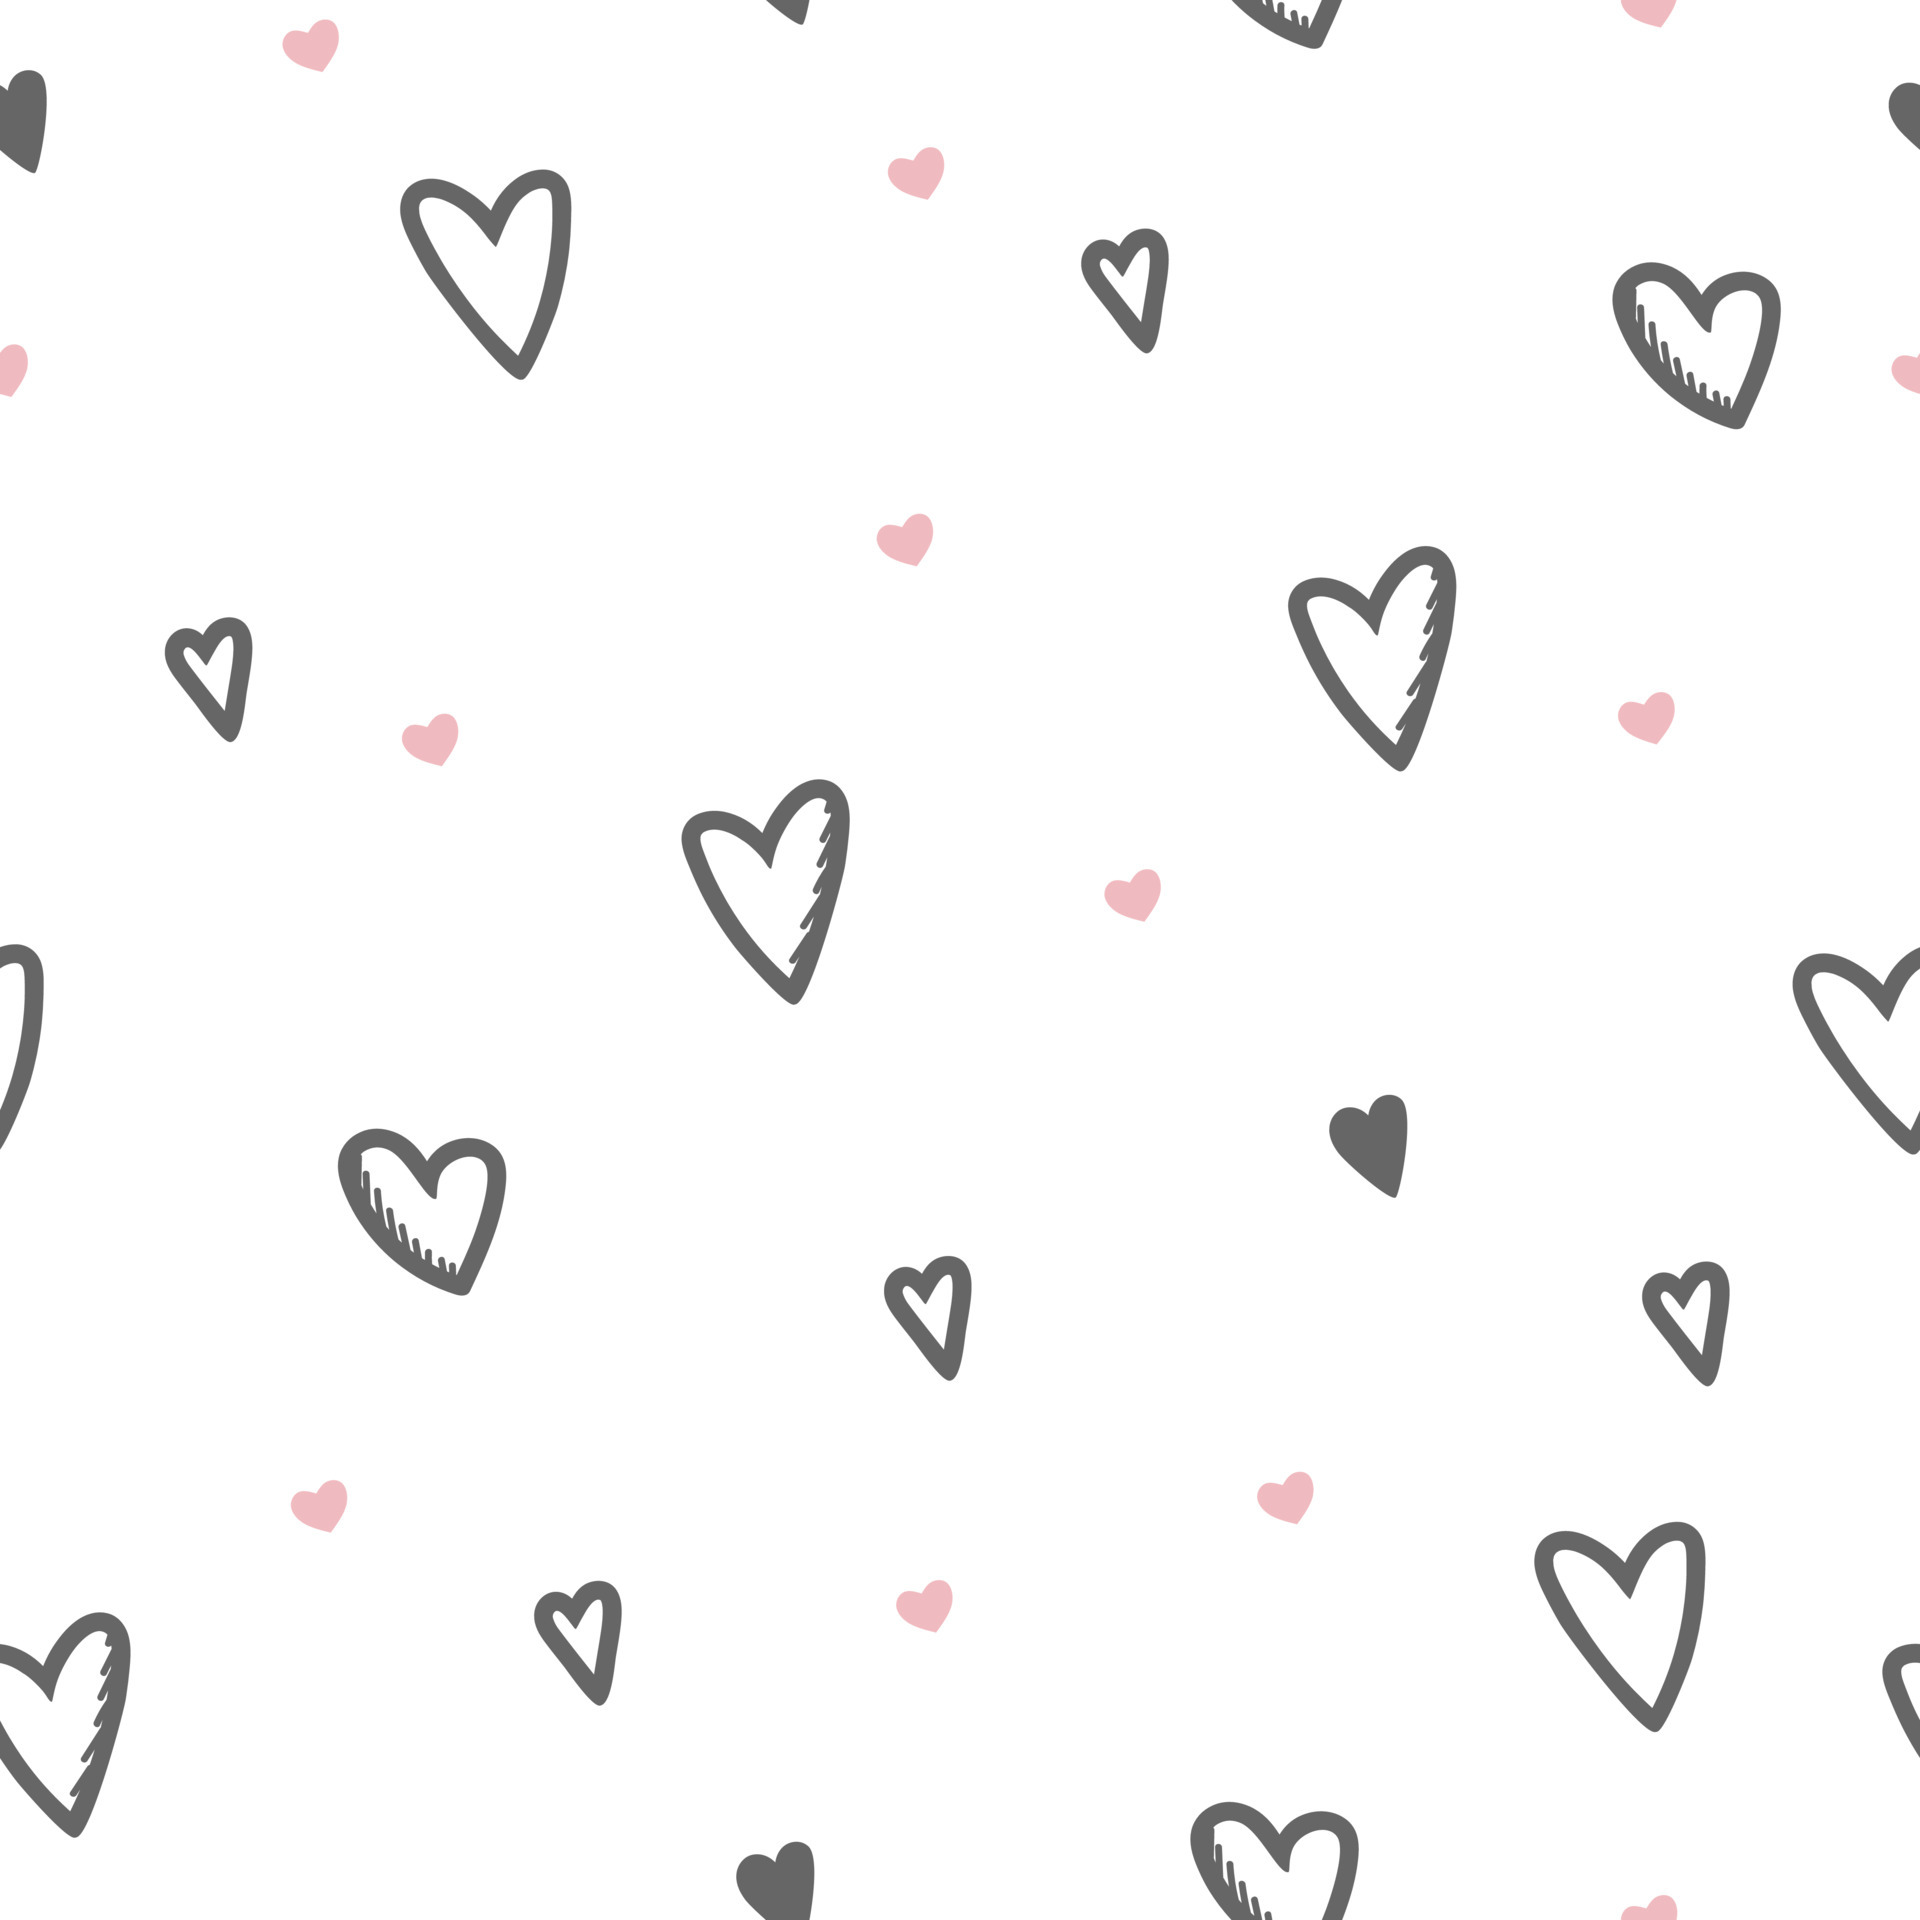 Seamless pattern of pink and gray hearts on a white background. Use on Valentines Day on textiles, wrapping paper, background, souvenirs. Vector illustration